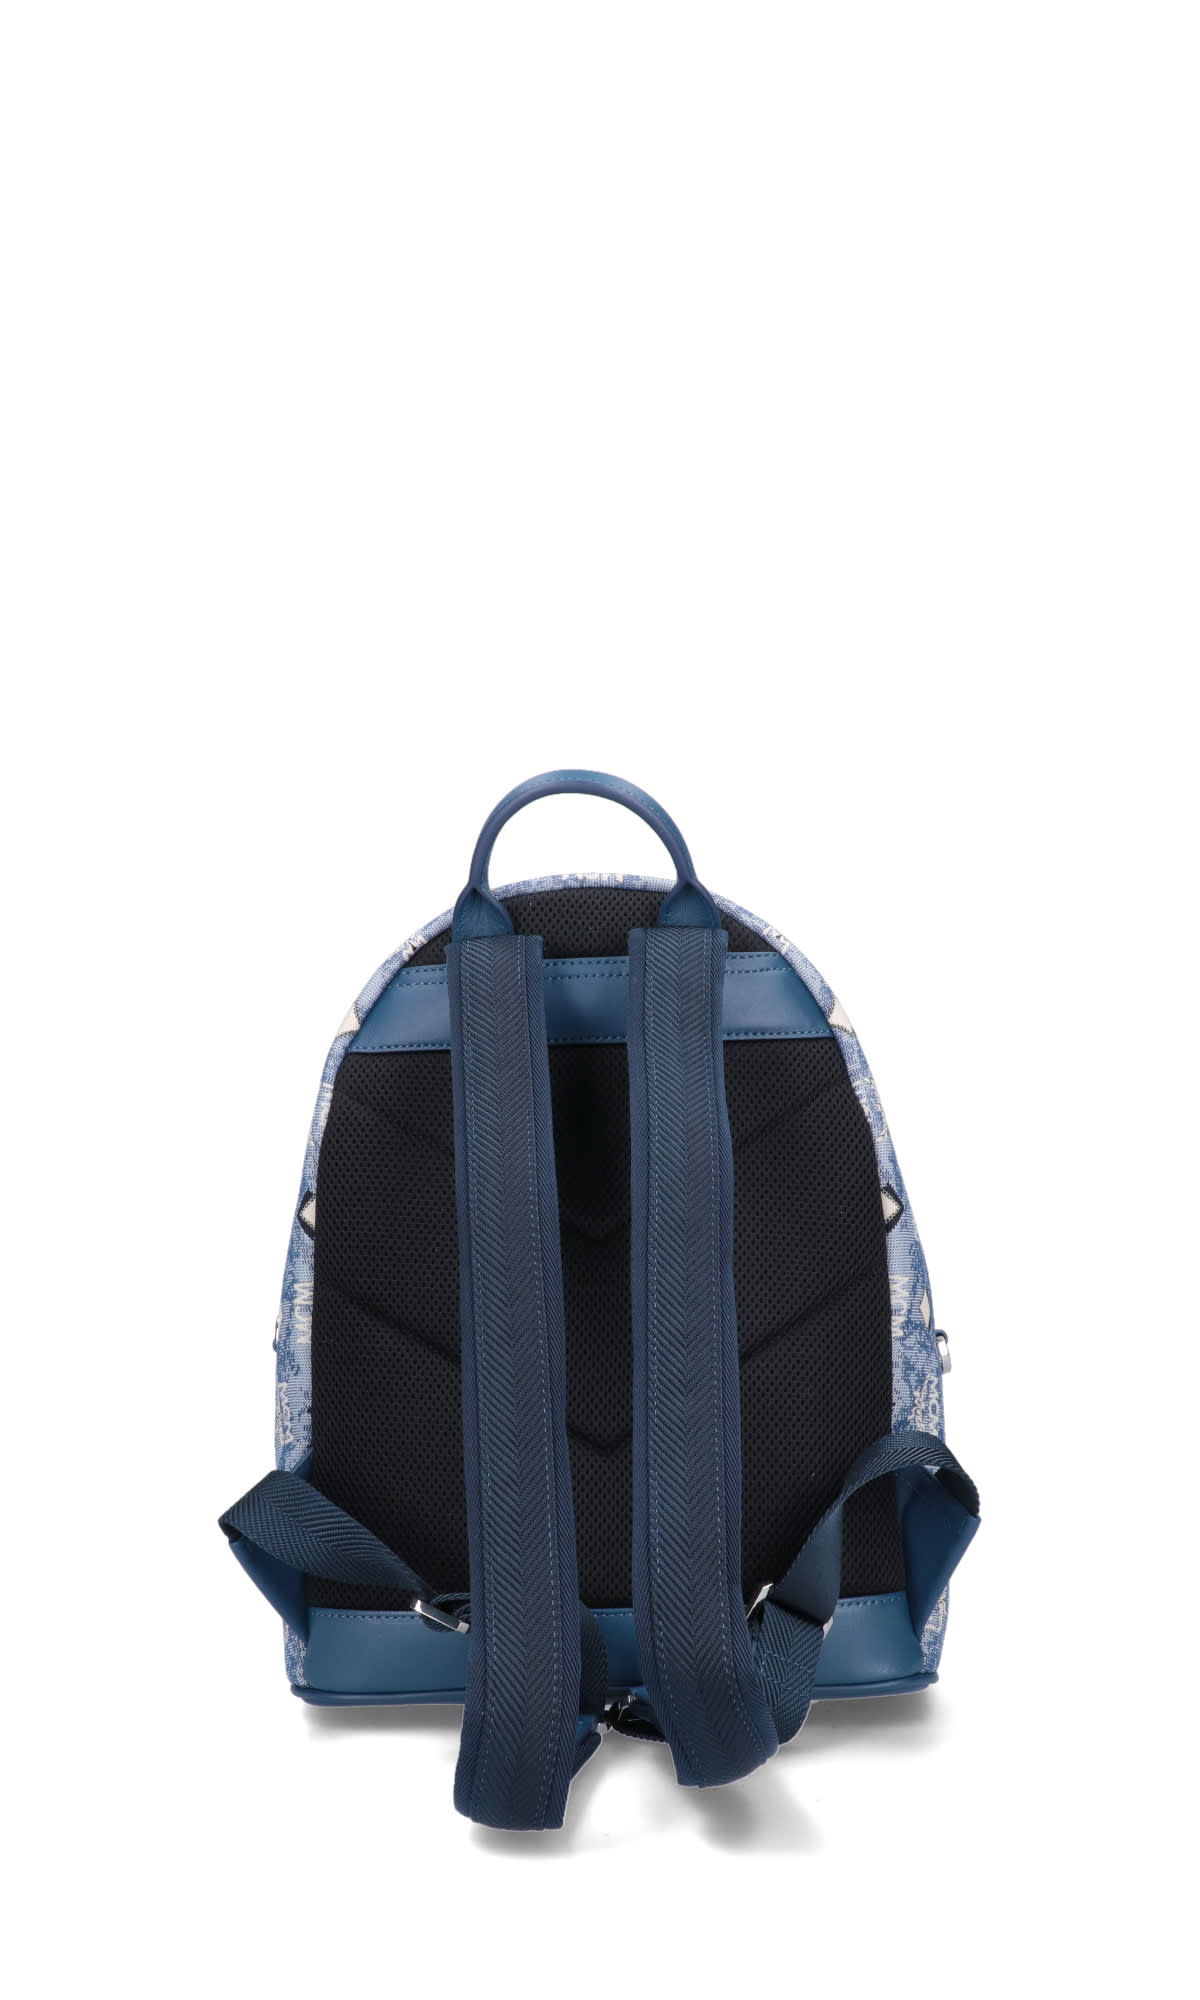 Berlin leather backpack MCM Blue in Leather - 37951928